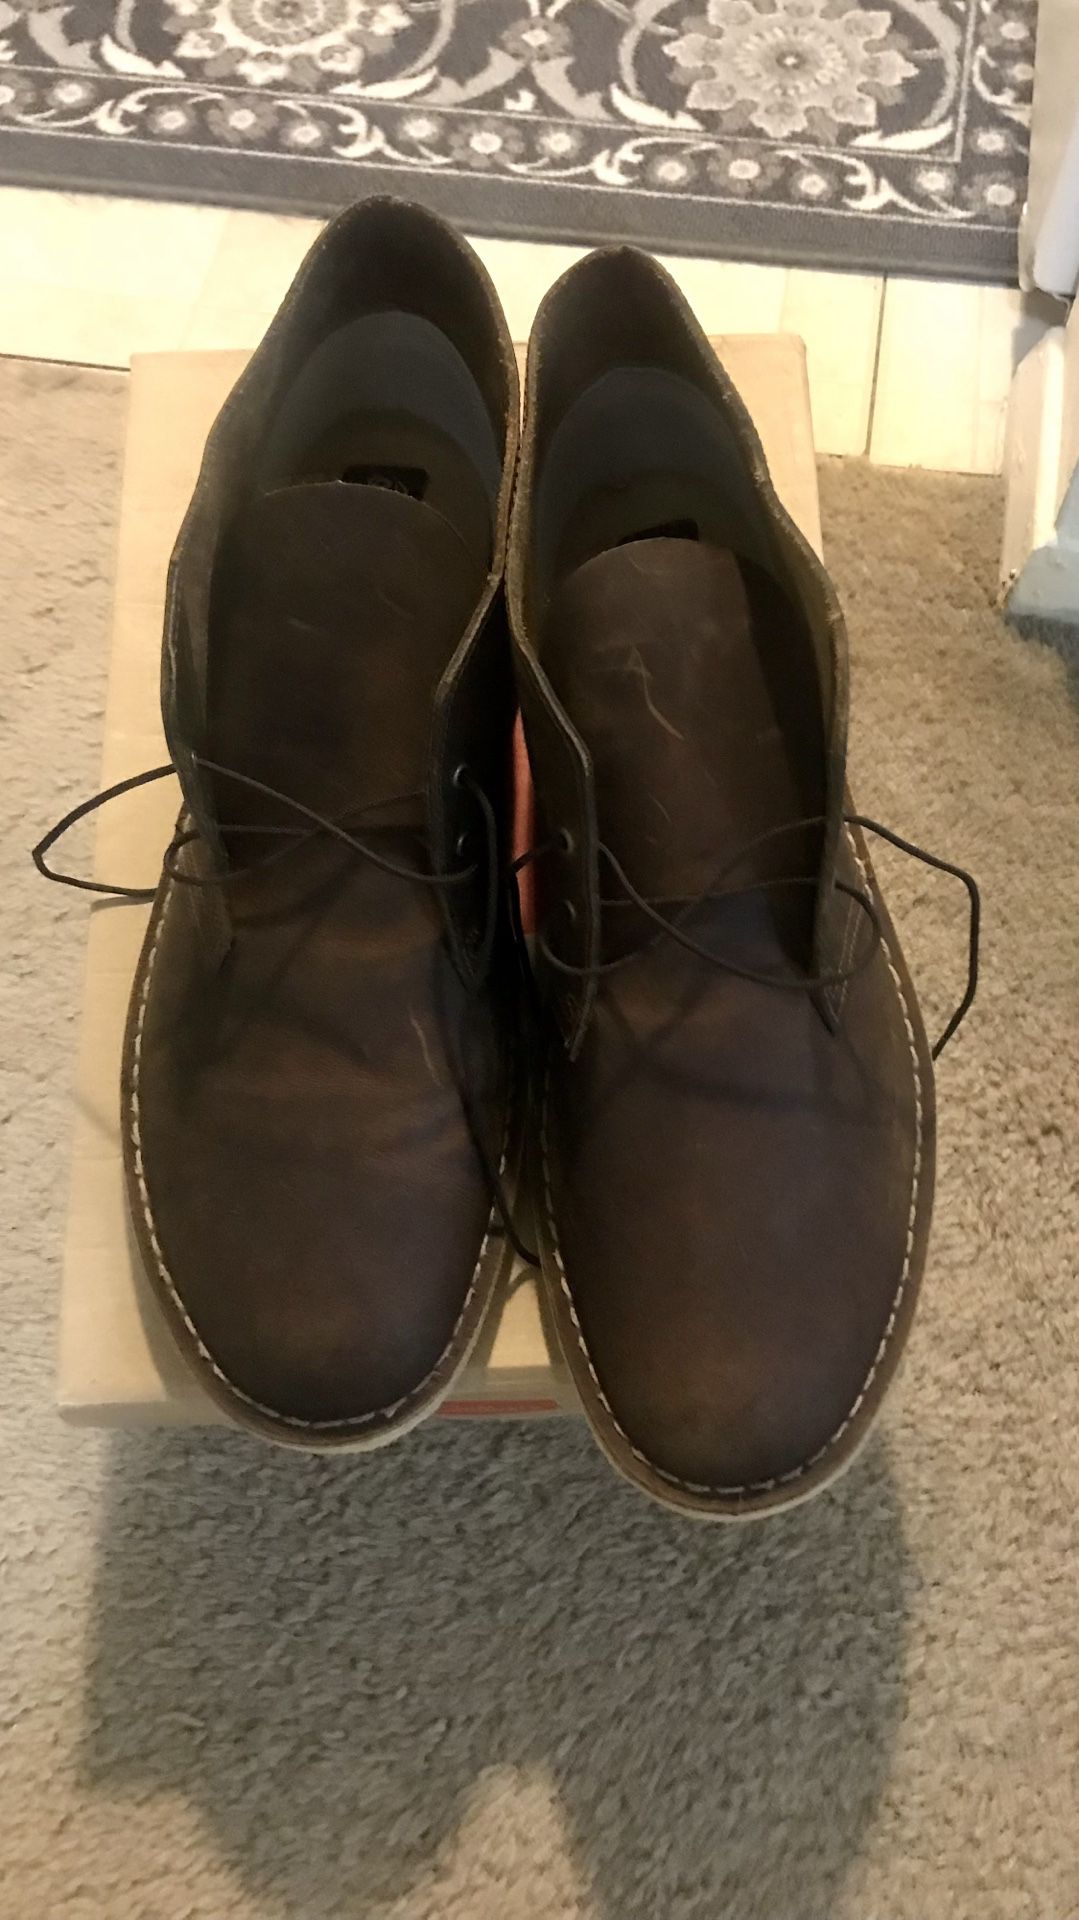 New Size 13 Men Clark’s Dessert Boot Pick Up Gaithersburg Md 20877 Check My Other Listings Thanks 